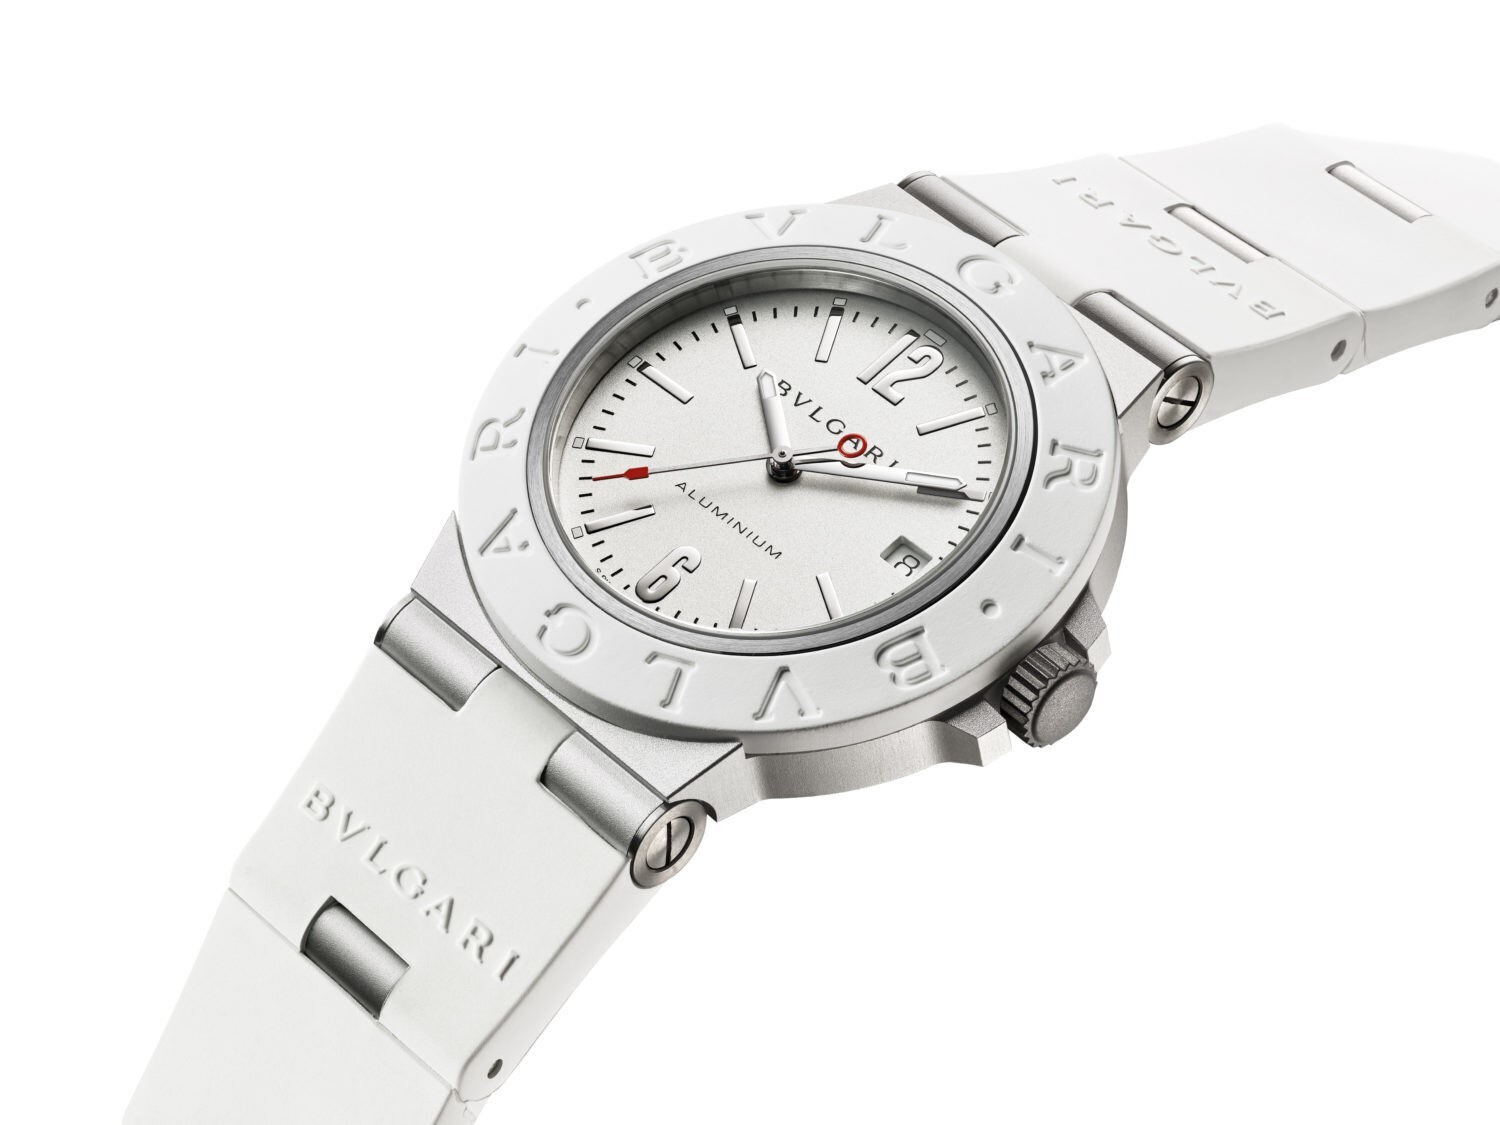 Bulgari's Aluminium White Automatic watch: An epitome of timeless sophistication